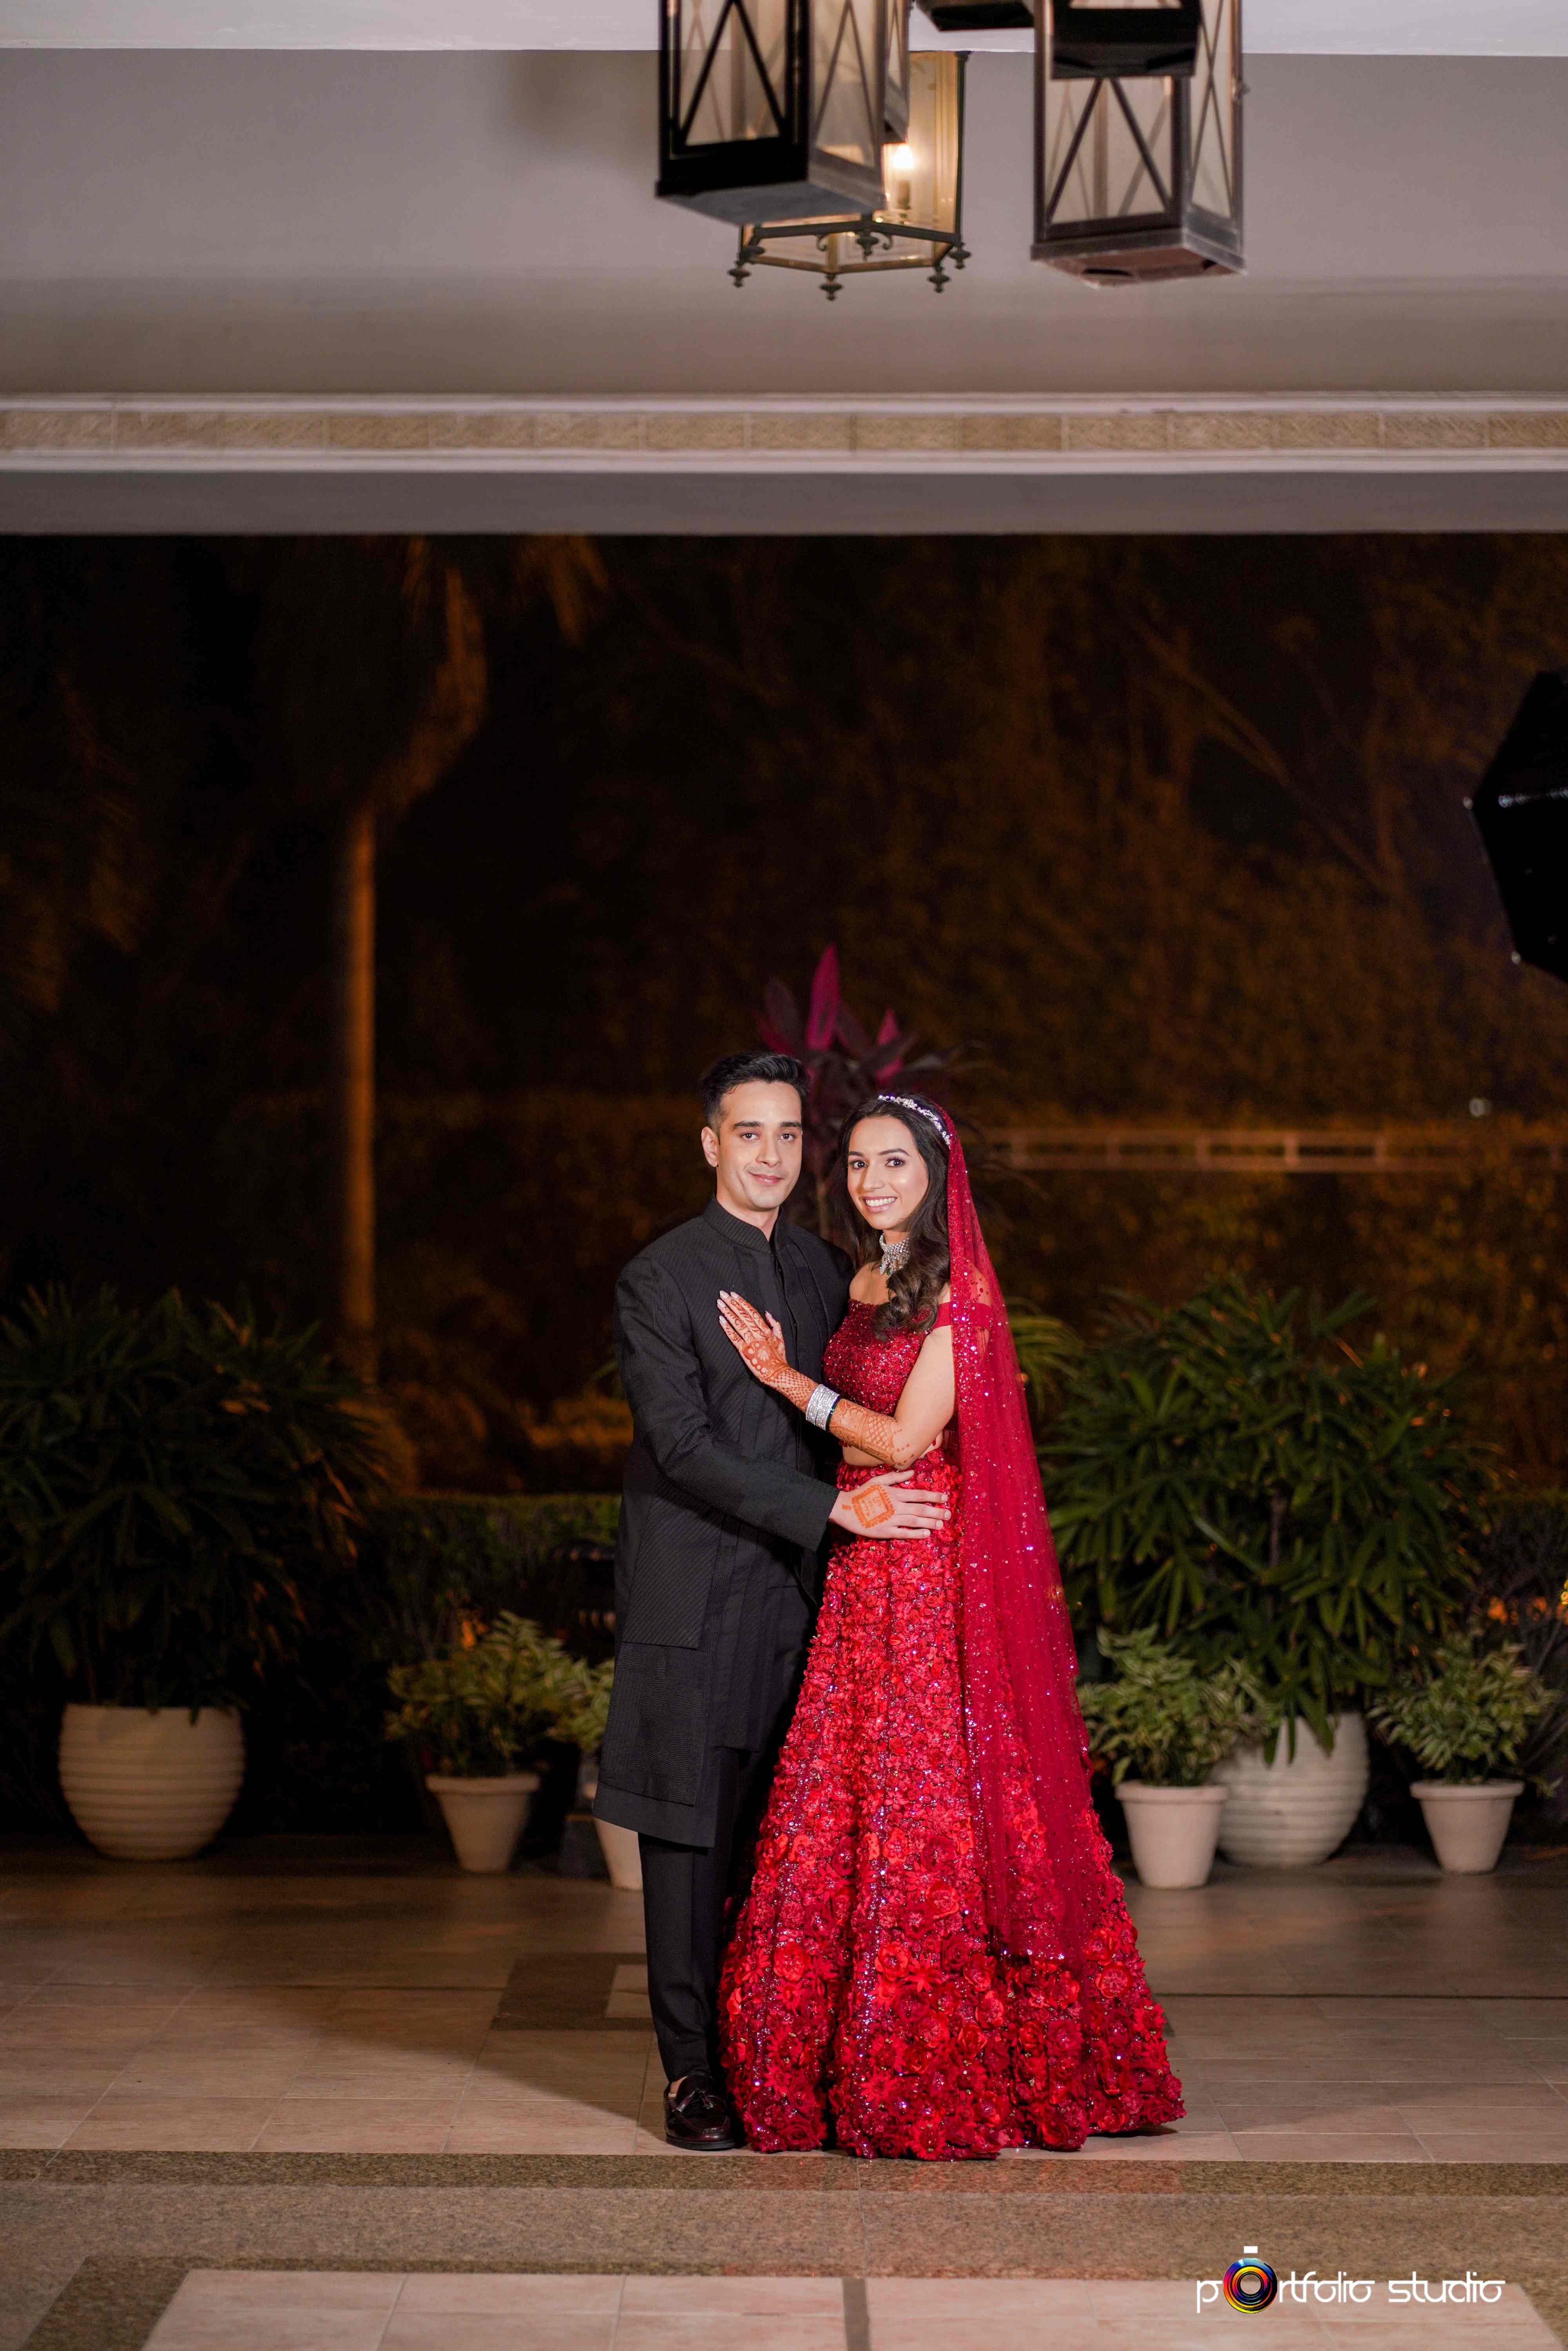 Urvashi & Manav’s Wedding Pictures Are So Surreal!